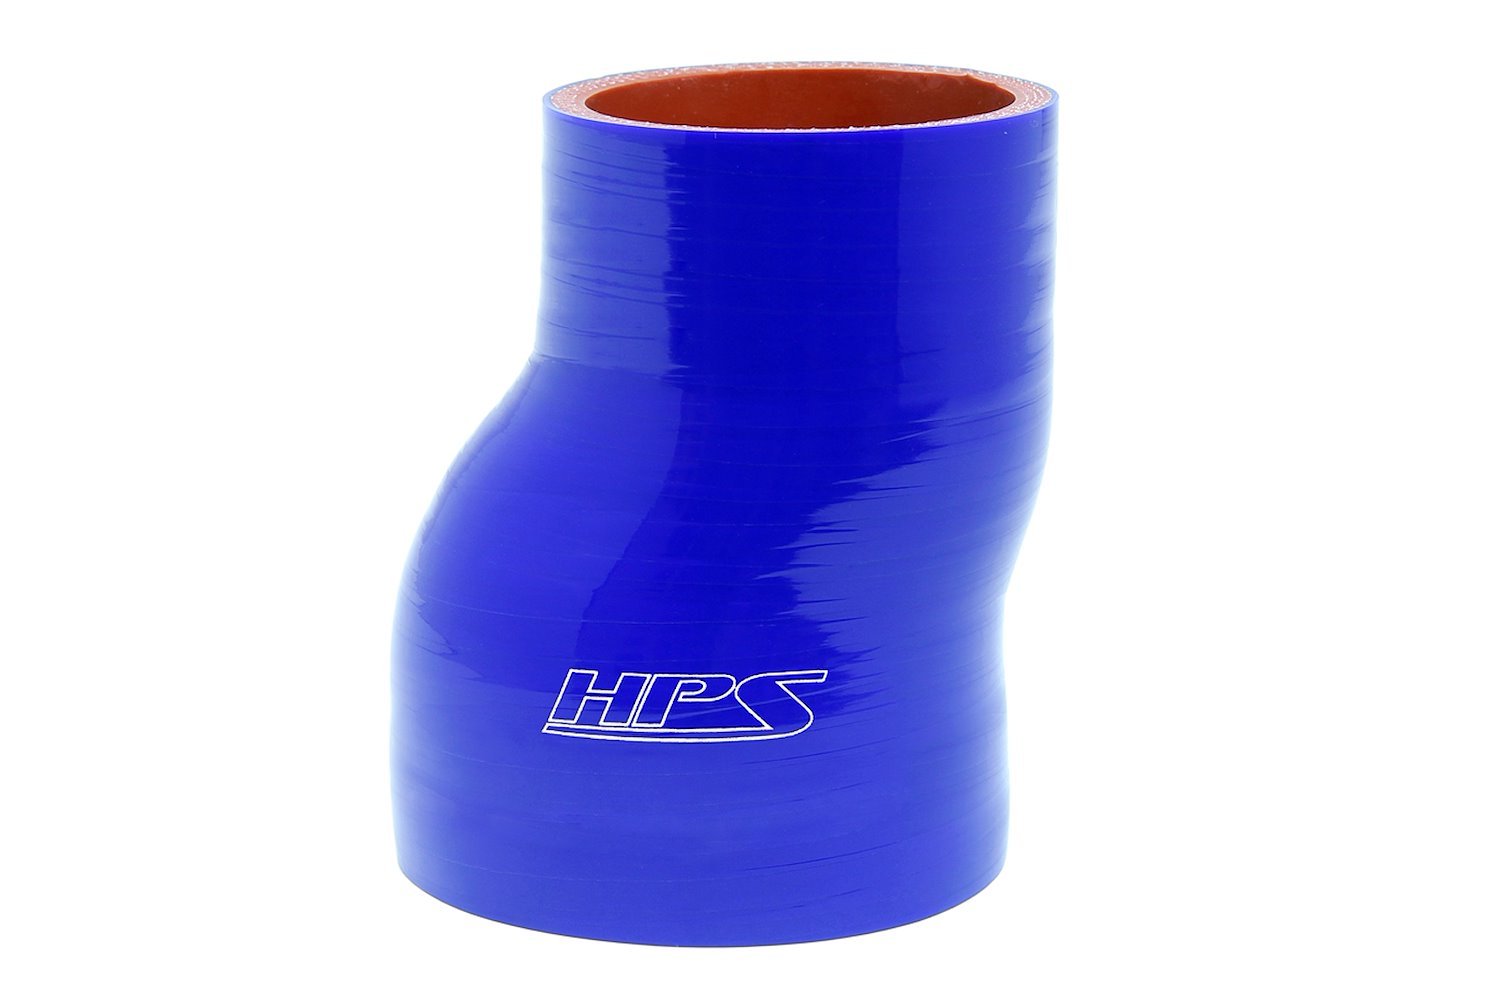 HTSOR-250-275-L6-BLUE Offset Reducer, High-Temp 4-Ply Reinforced, 2 1/2 in. ID To 2 3/4 in. ID, 6 in. Length.